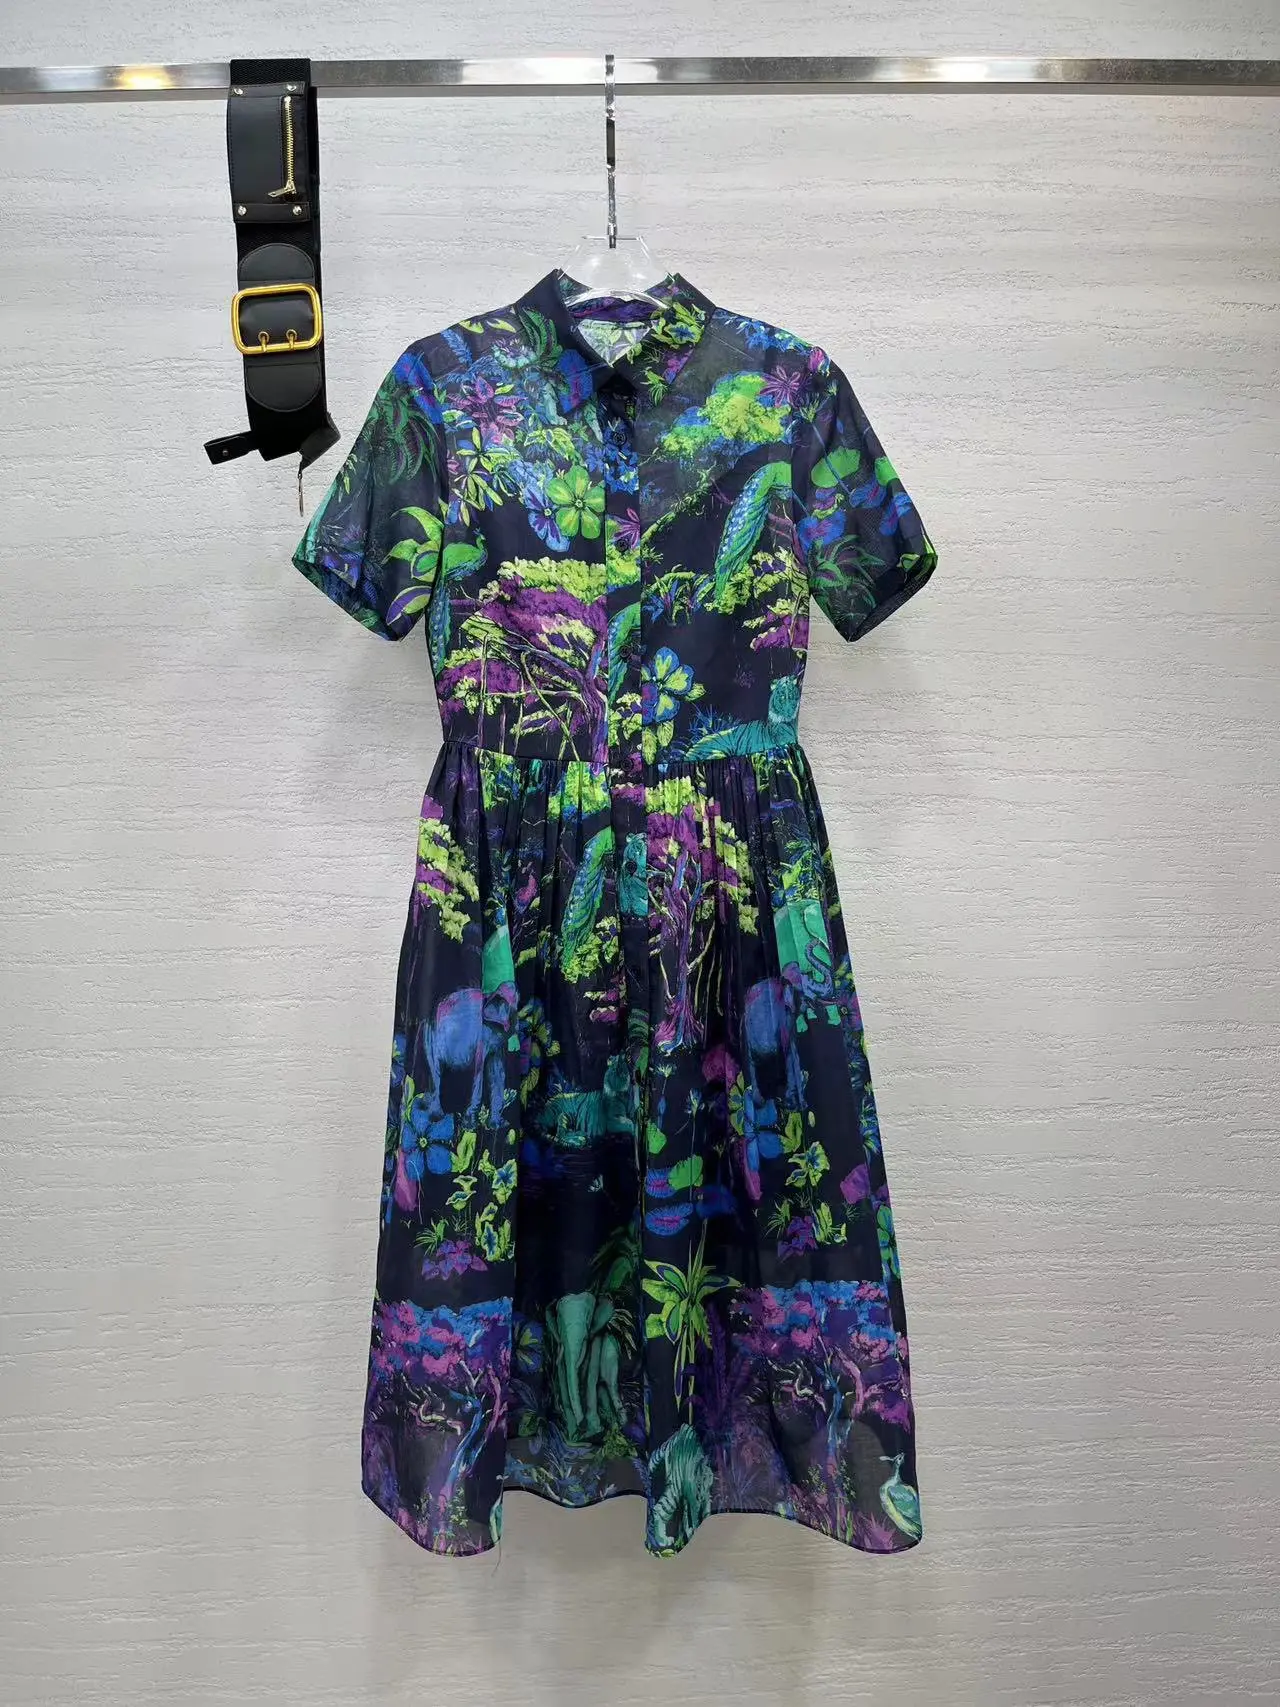 2023 spring and summer women's clothing fashion new Printed Dress 0526